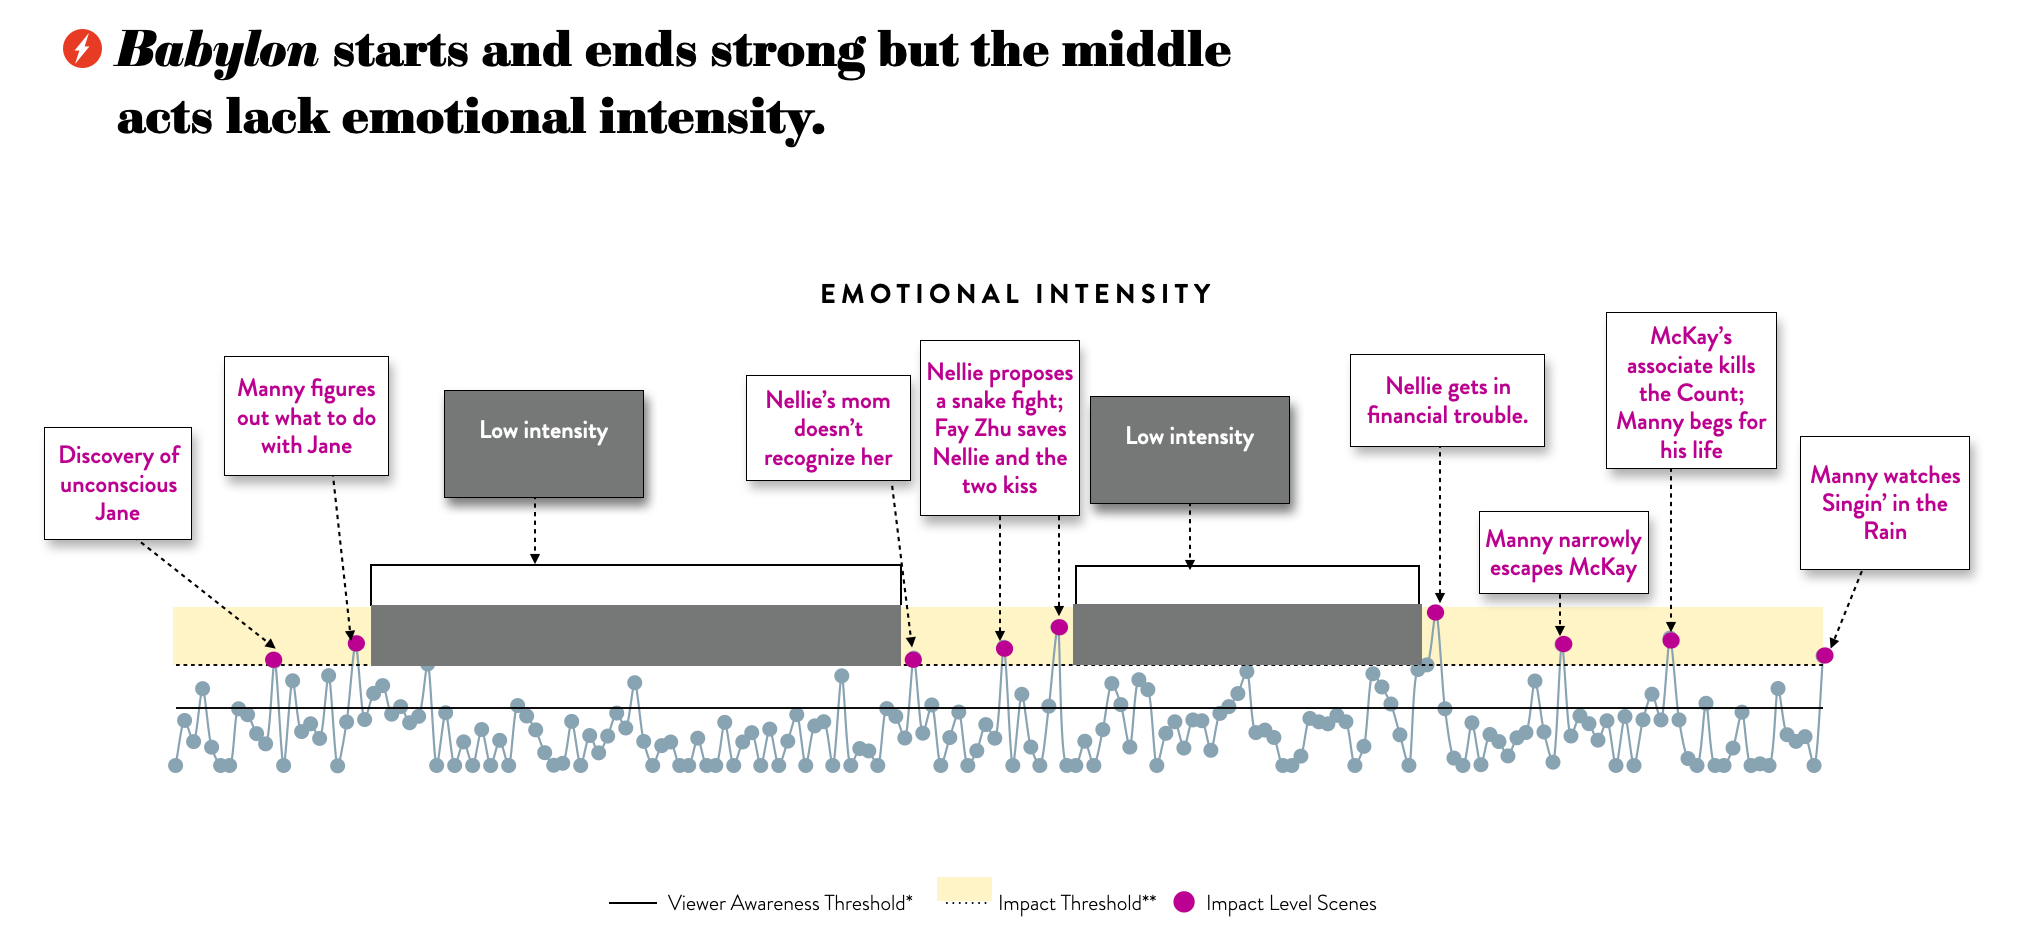 Emotional Intensity gauges the strength of an audience’s response to the emotional or physical conflict within a script on a scene-by-scene basis. The low emotional intensity in the middle of the story does not incentivize the viewer to continue watching - which is needed to get them to the more intense conclusion